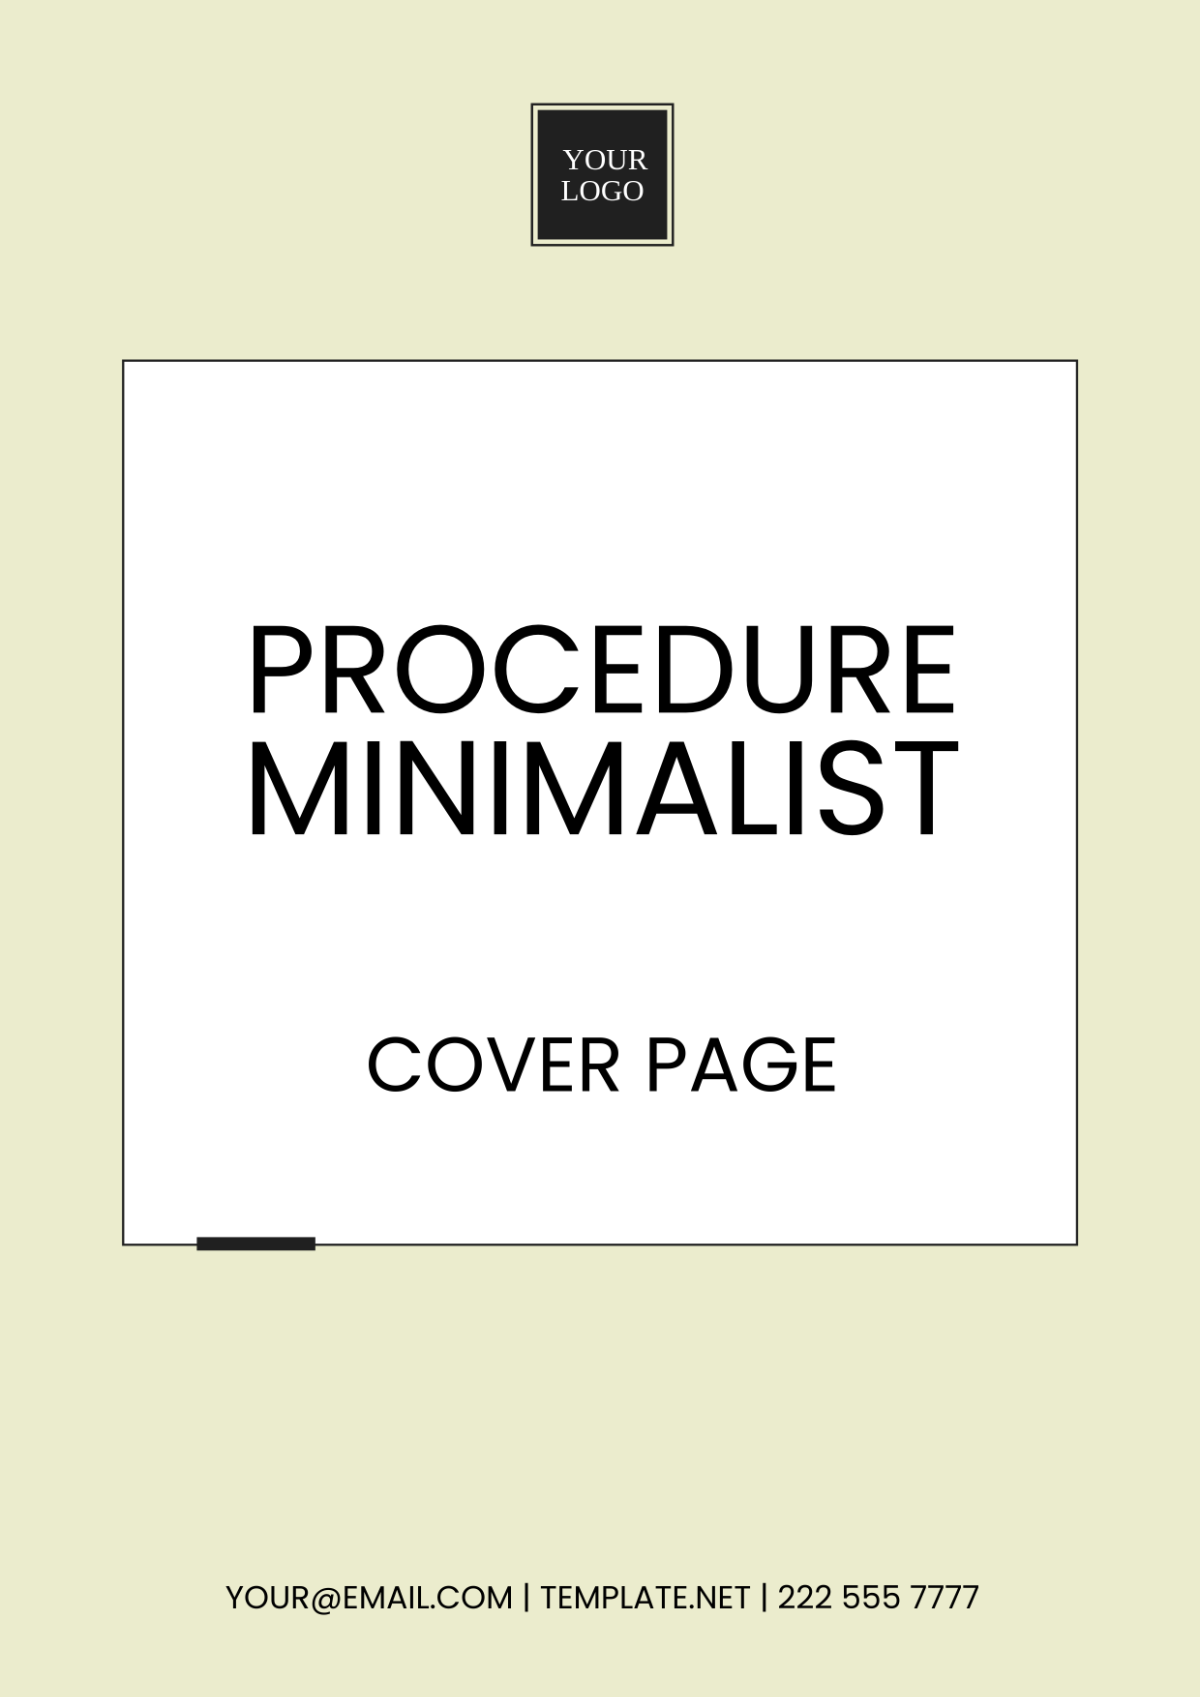 Free Procedure Minimalist Cover Page Template